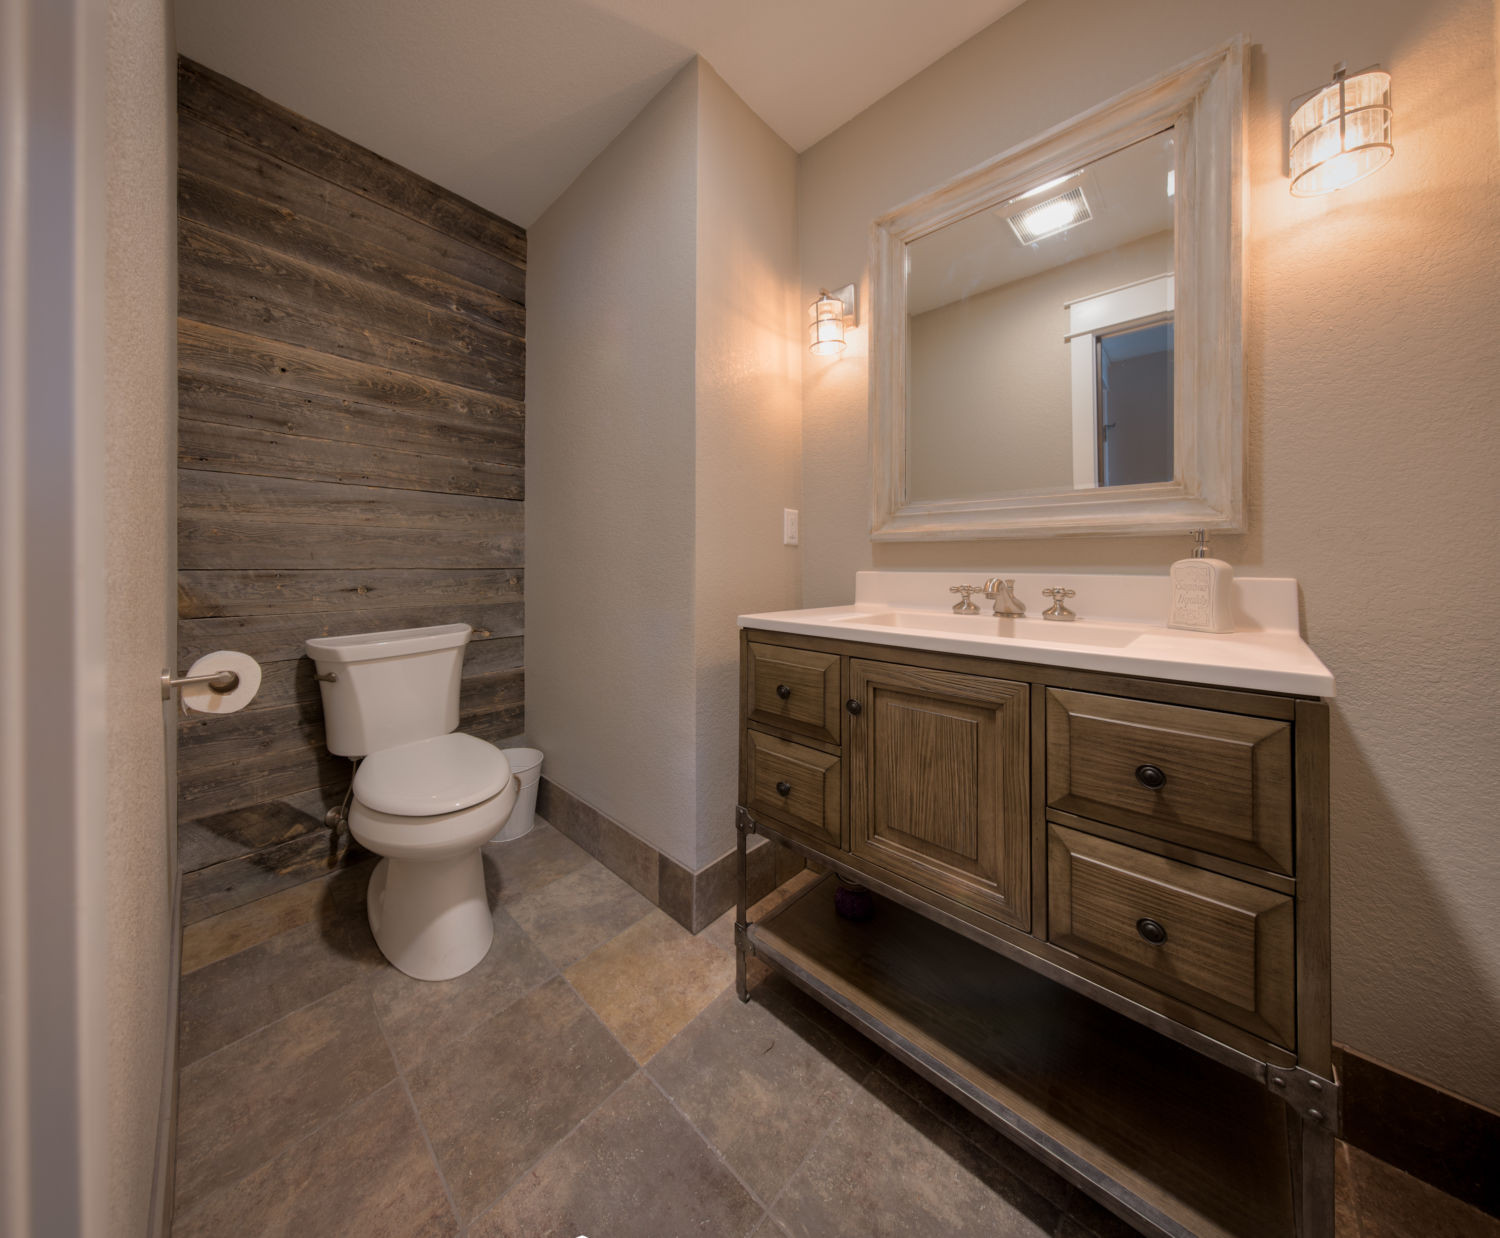 Barnwood Tile Bathroom
 6 Tips to Remodeling a Busy Bathroom by HighCraft Builders